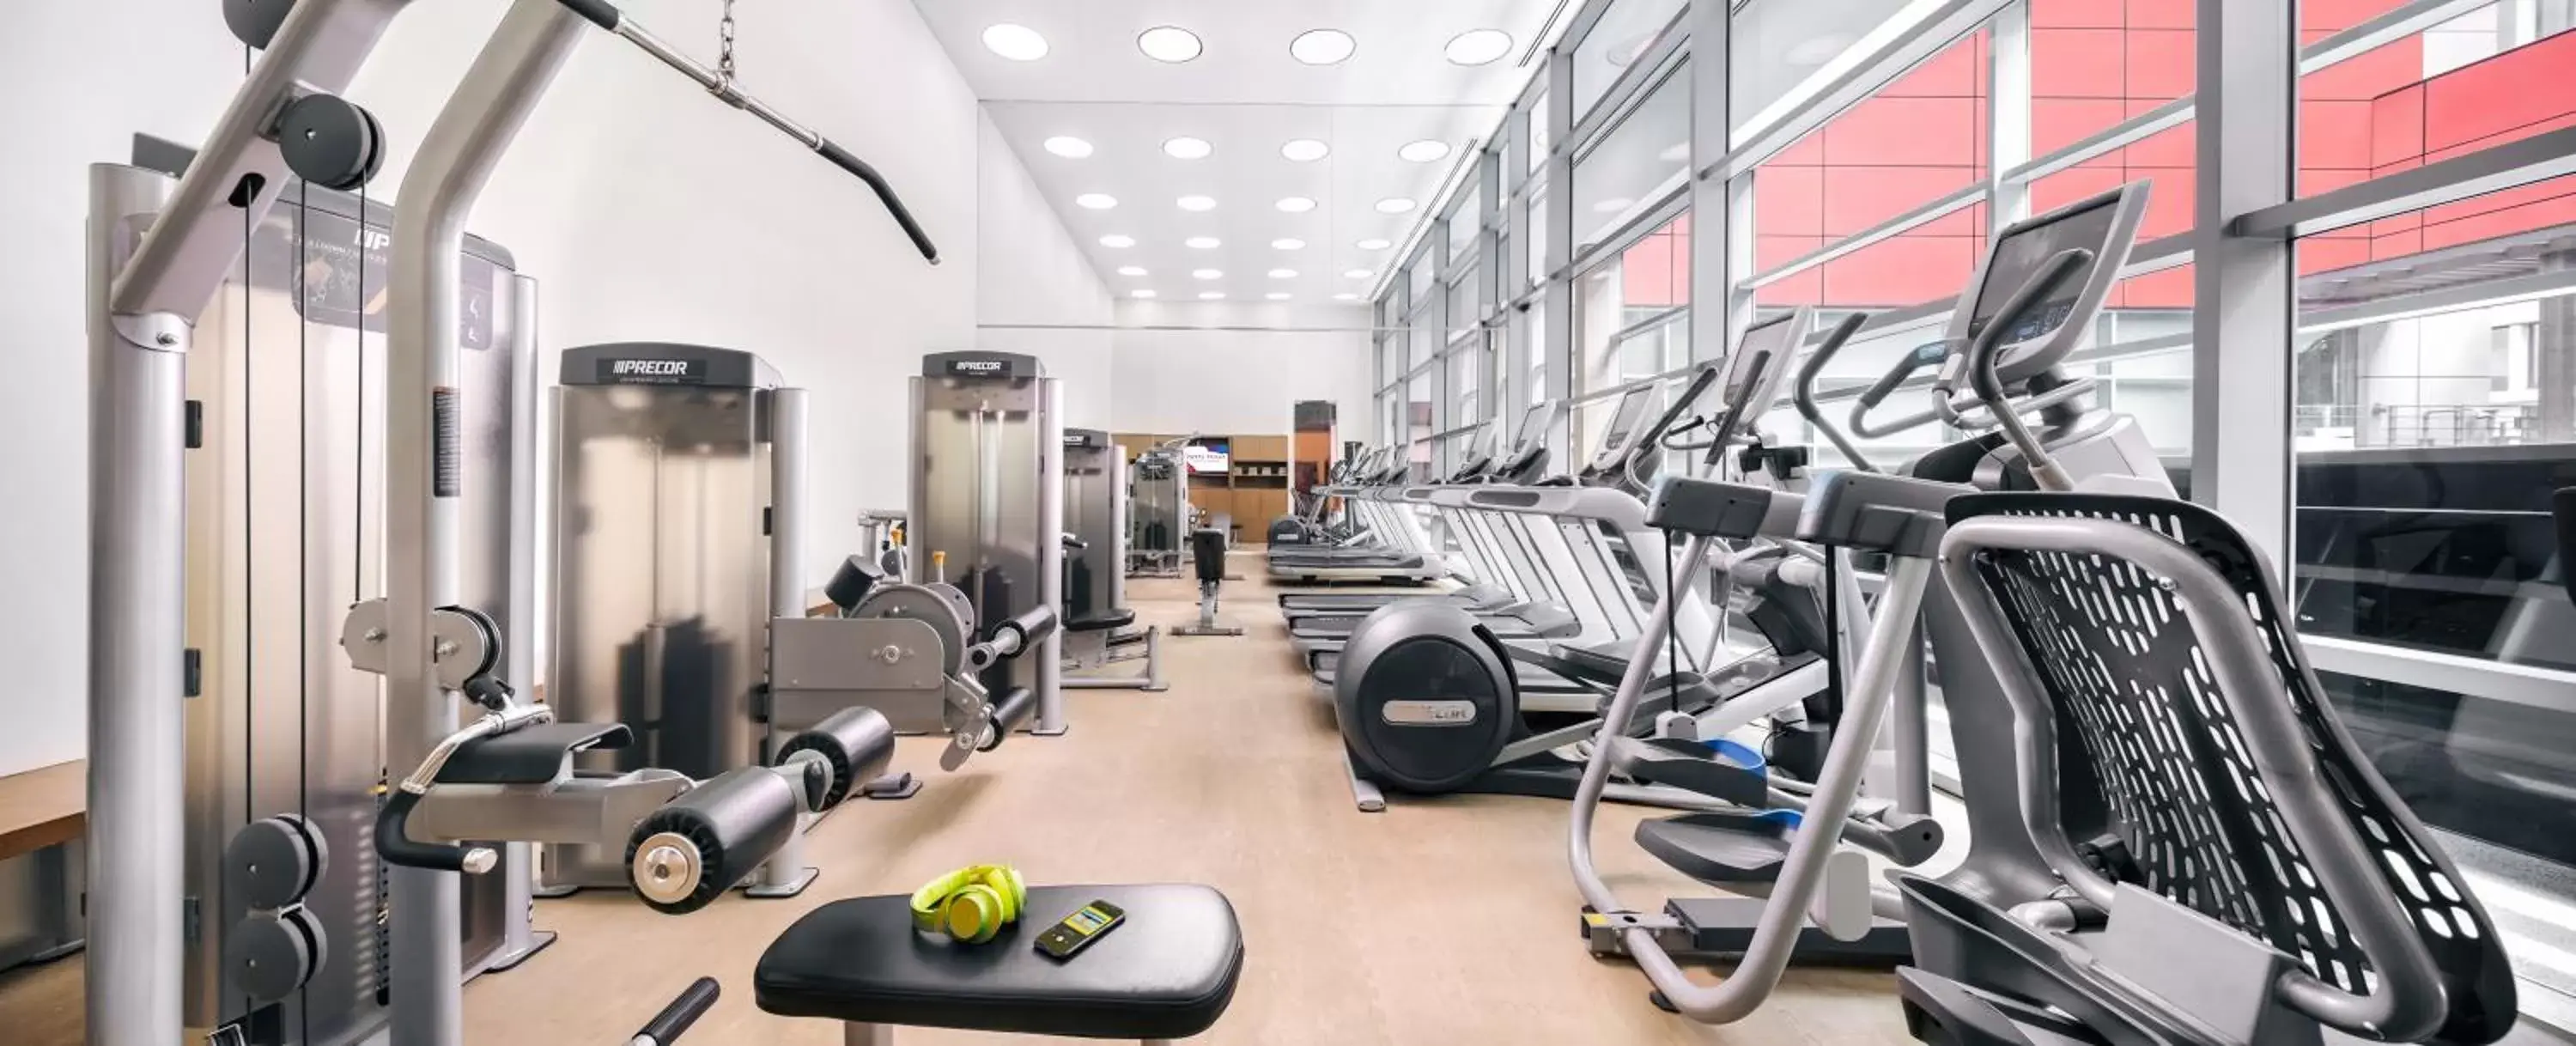 Fitness centre/facilities, Fitness Center/Facilities in Royal Plaza on Scotts